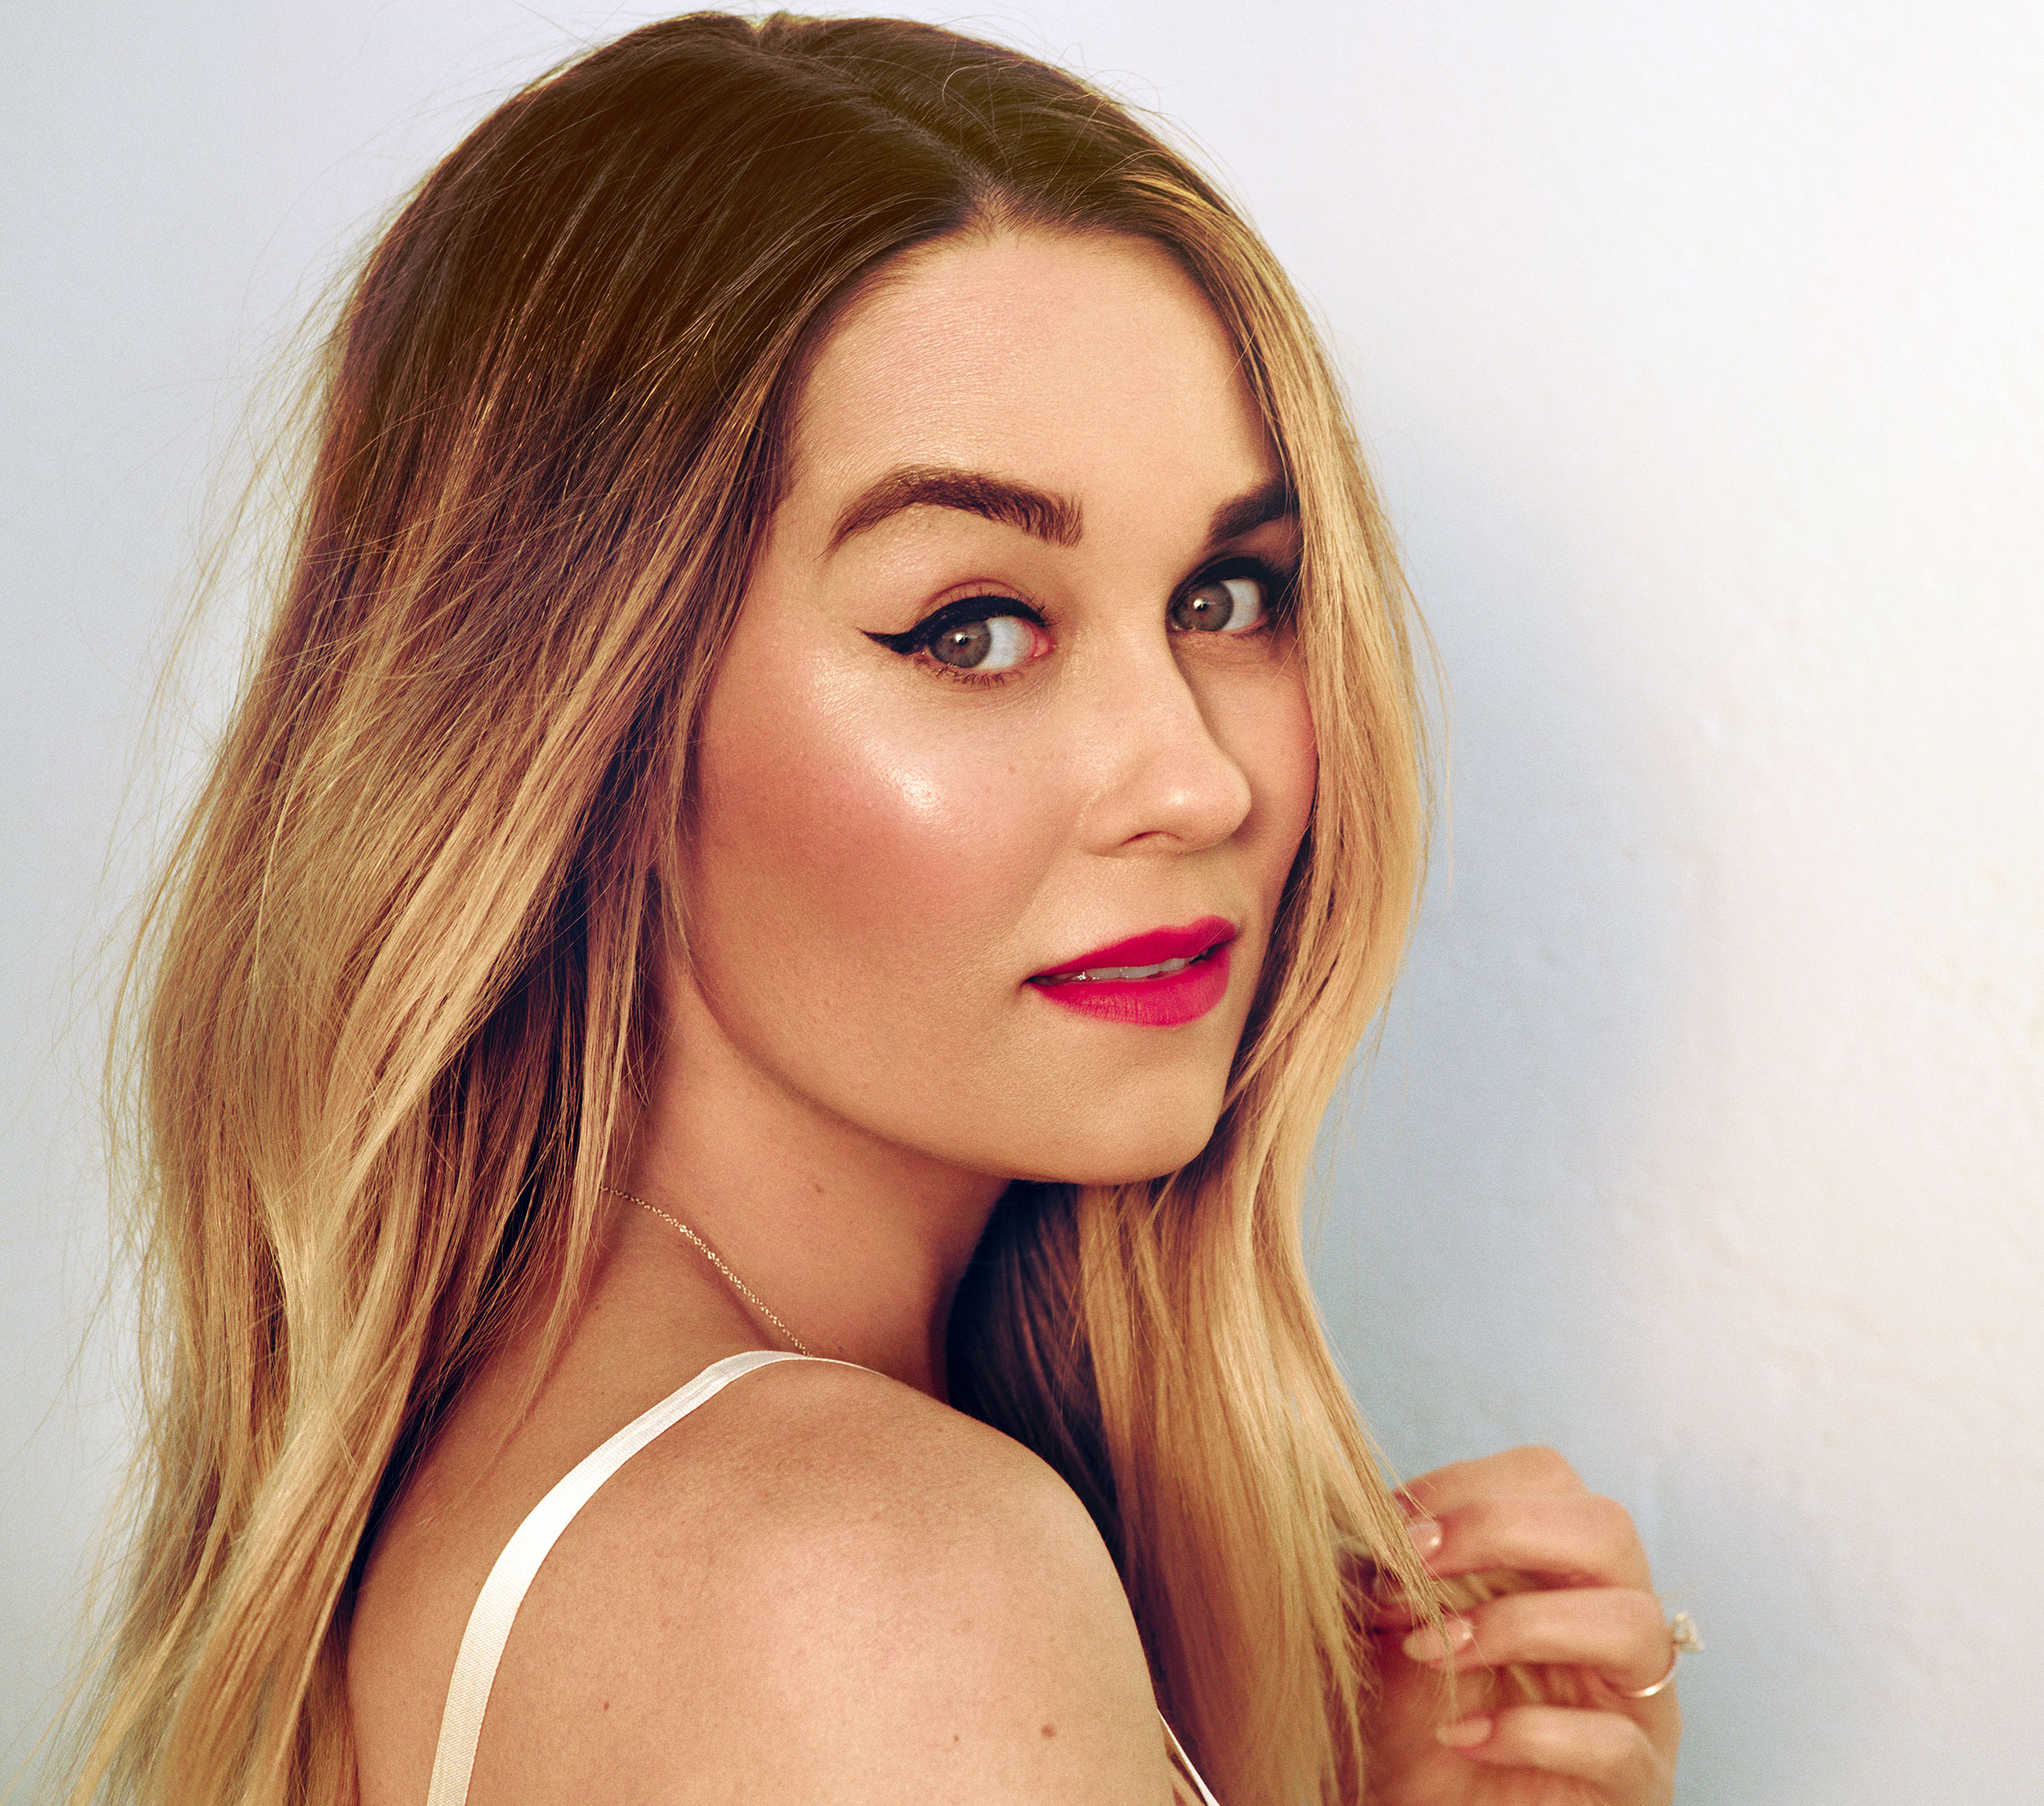 Lauren Conrad Expands Makeup Line to Include Skin Care, Interview